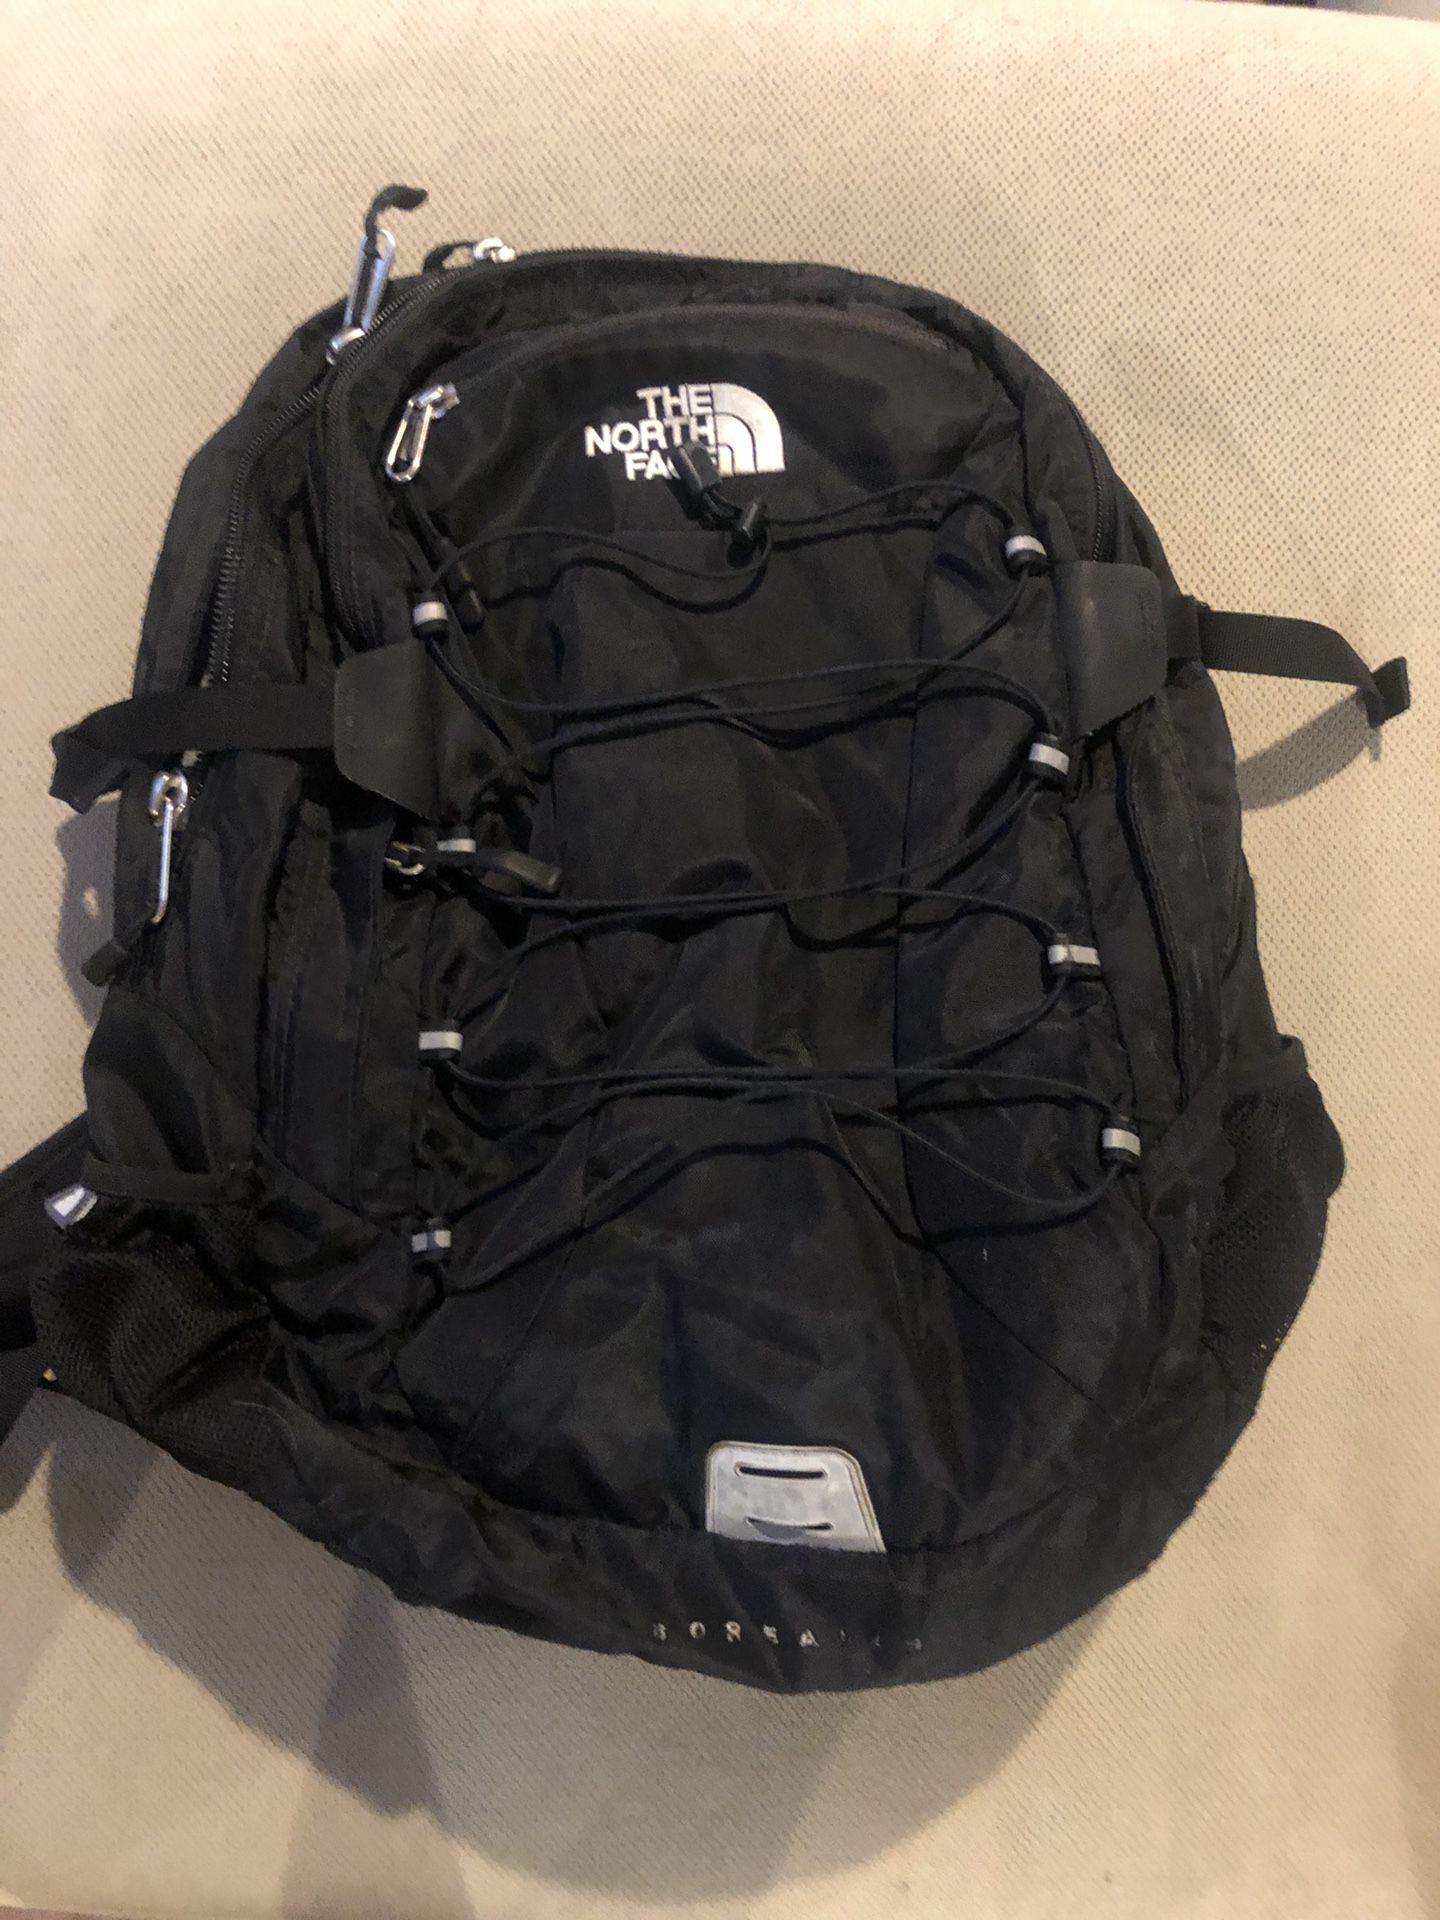 NorthFace backpack